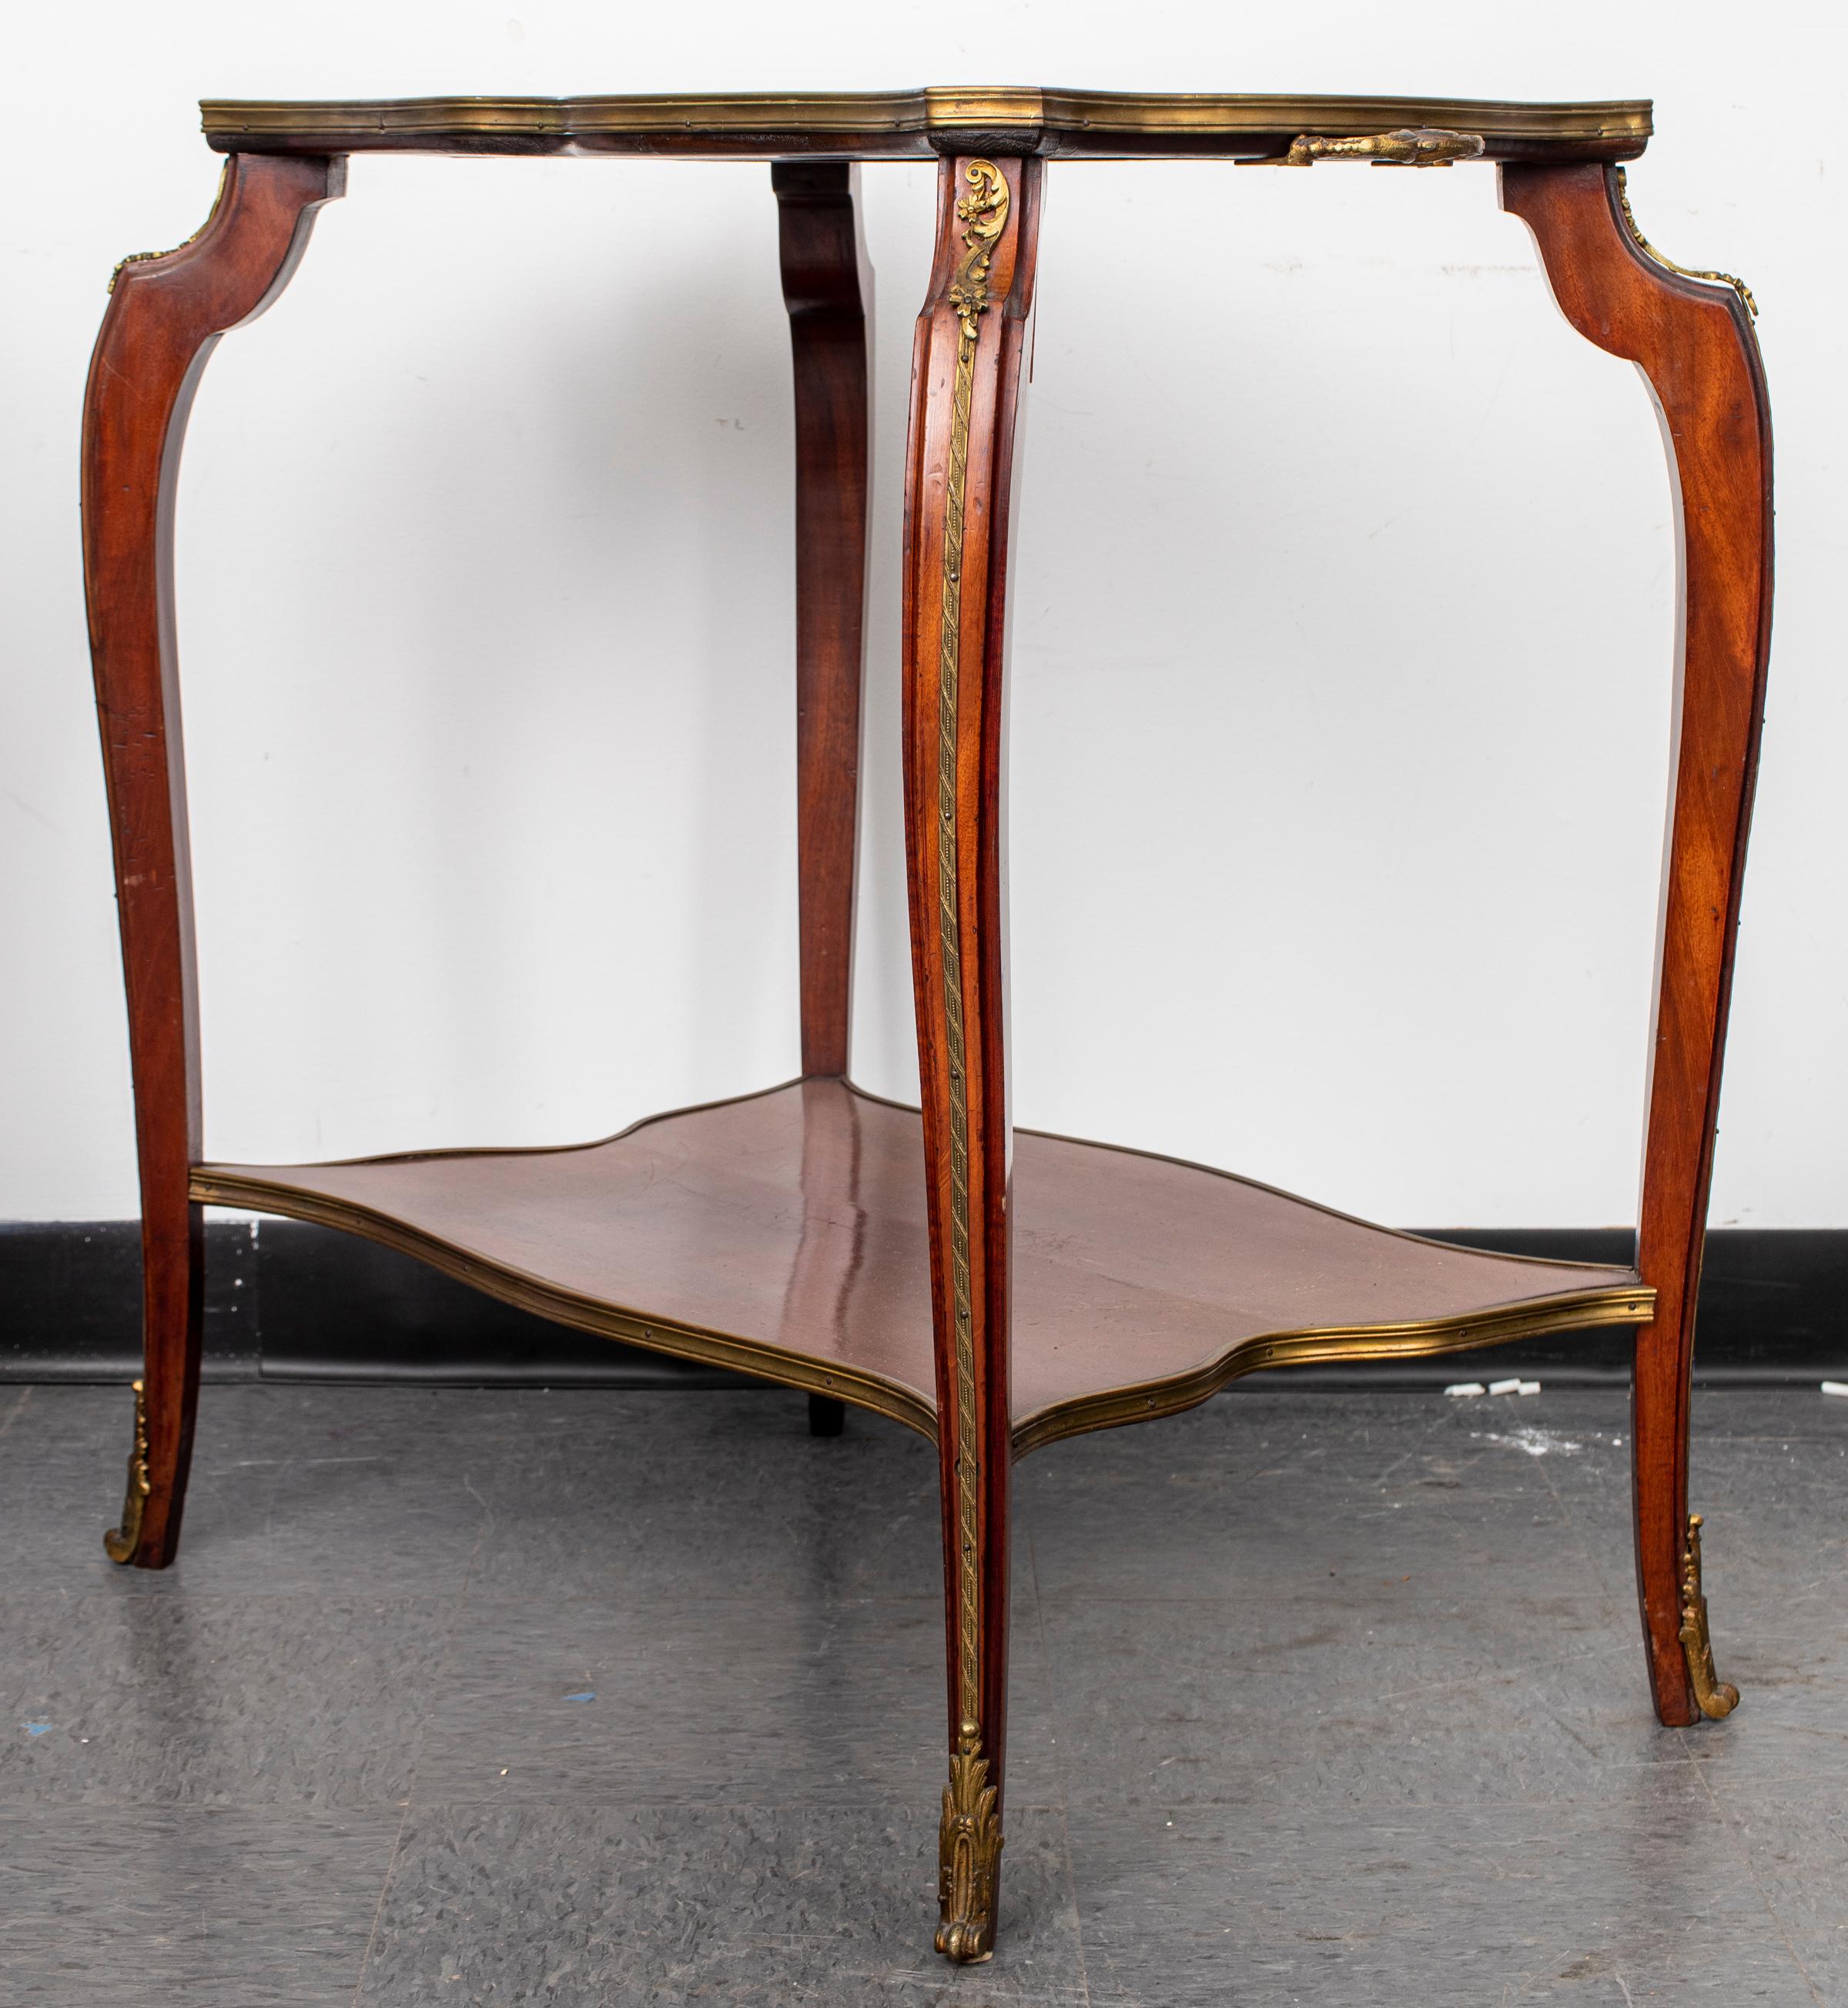 Louis XV style gilt bronze mounted two-tier tea table with pink marble top. 31.25” H x 29” W x 20.5” D.